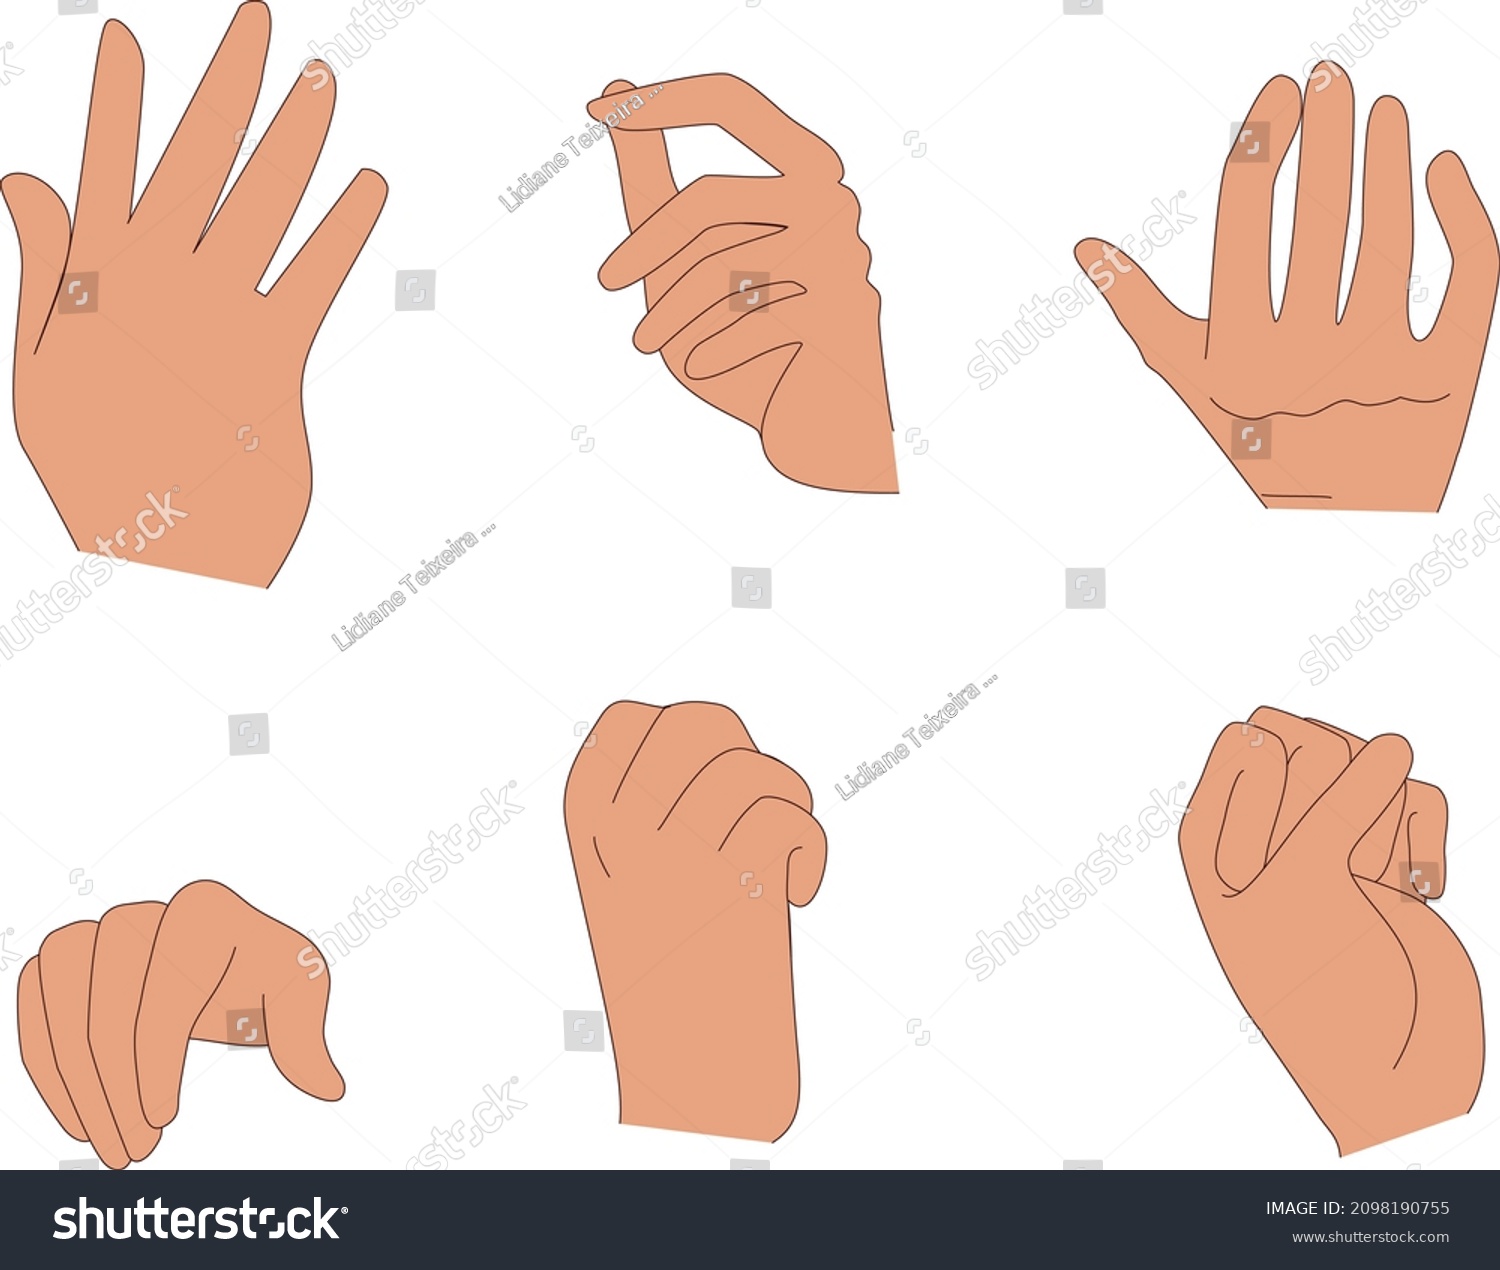 Human Hand Drawing 6 Different Position Stock Vector (Royalty Free ...